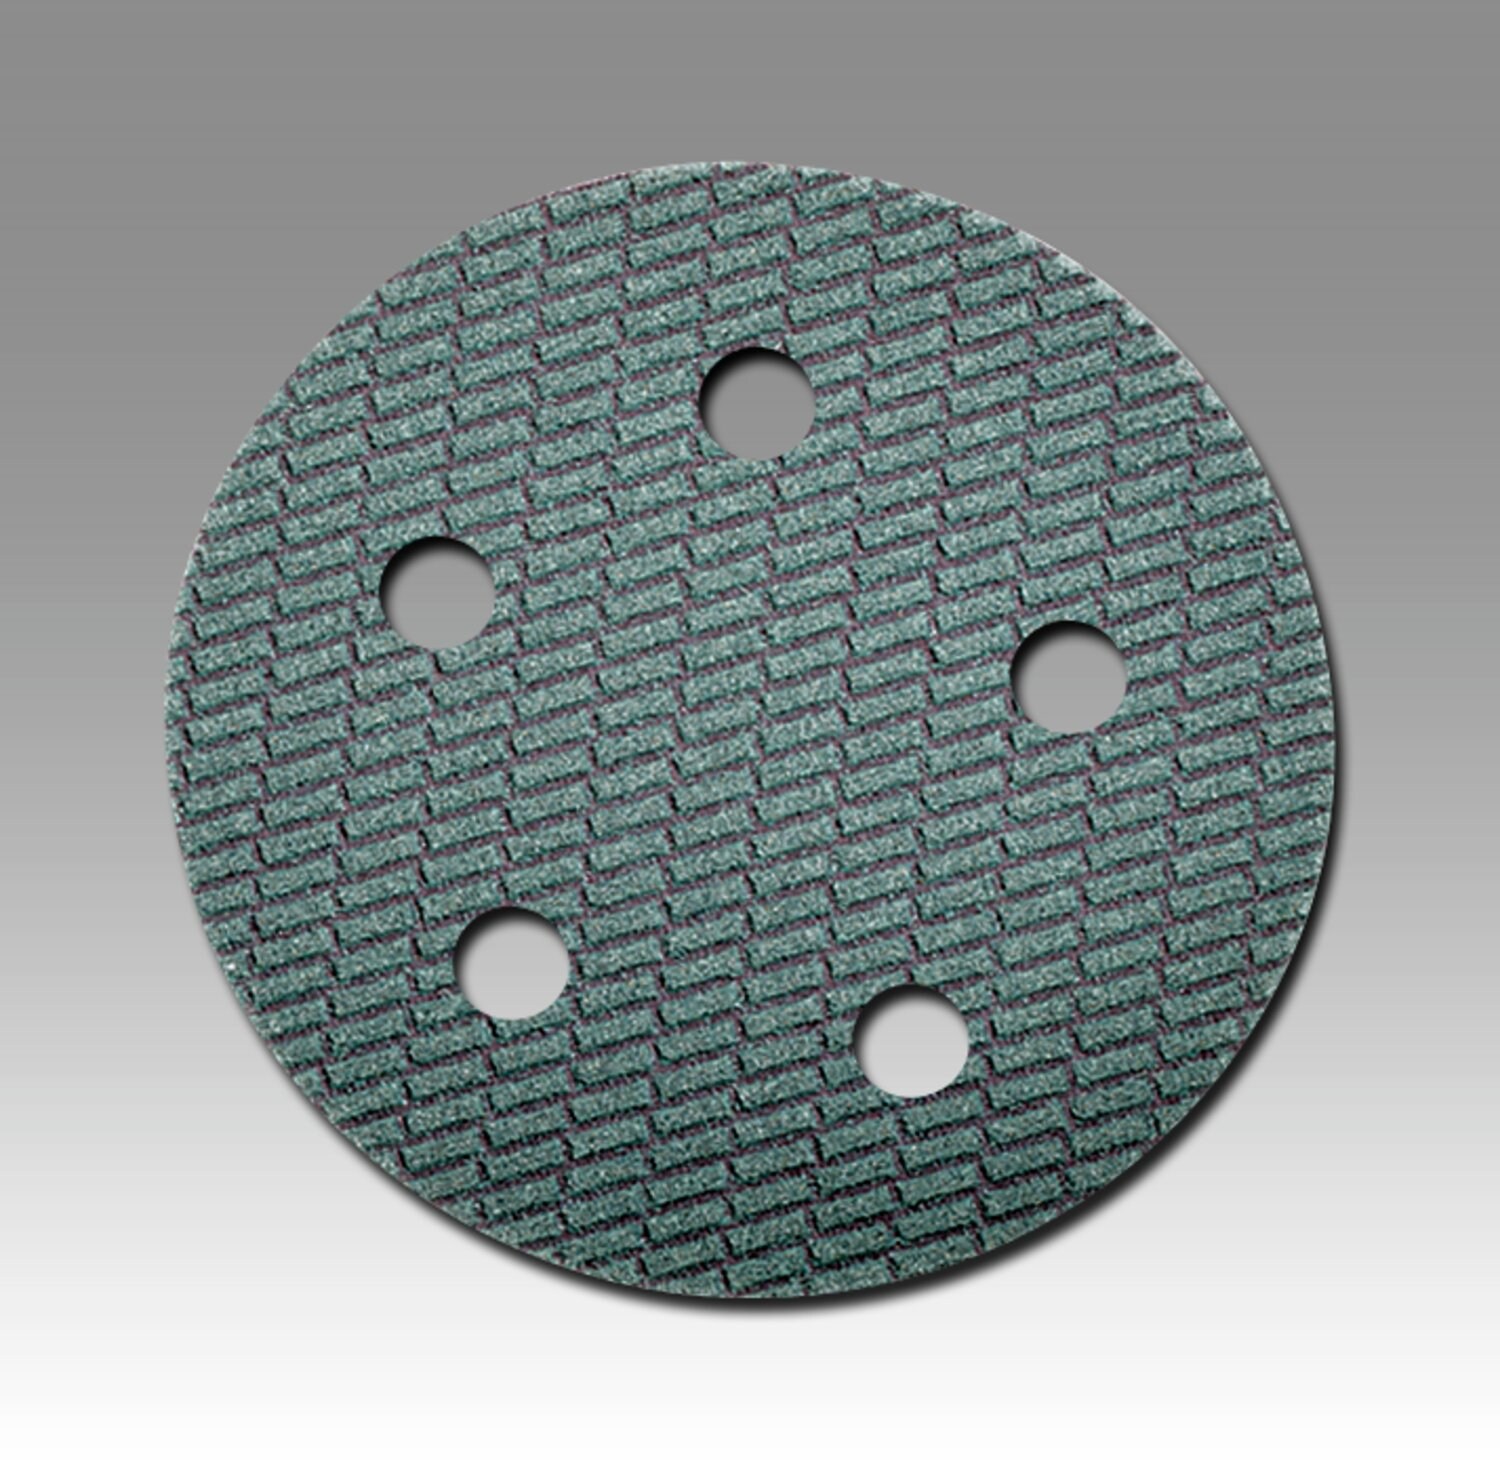 7100109142 - 3M Trizact Hookit Cloth Disc 337DC, 5 in x NH, 5 Hole, A300 X-weight,
D/F, Die 500FH, 50 ea/Case